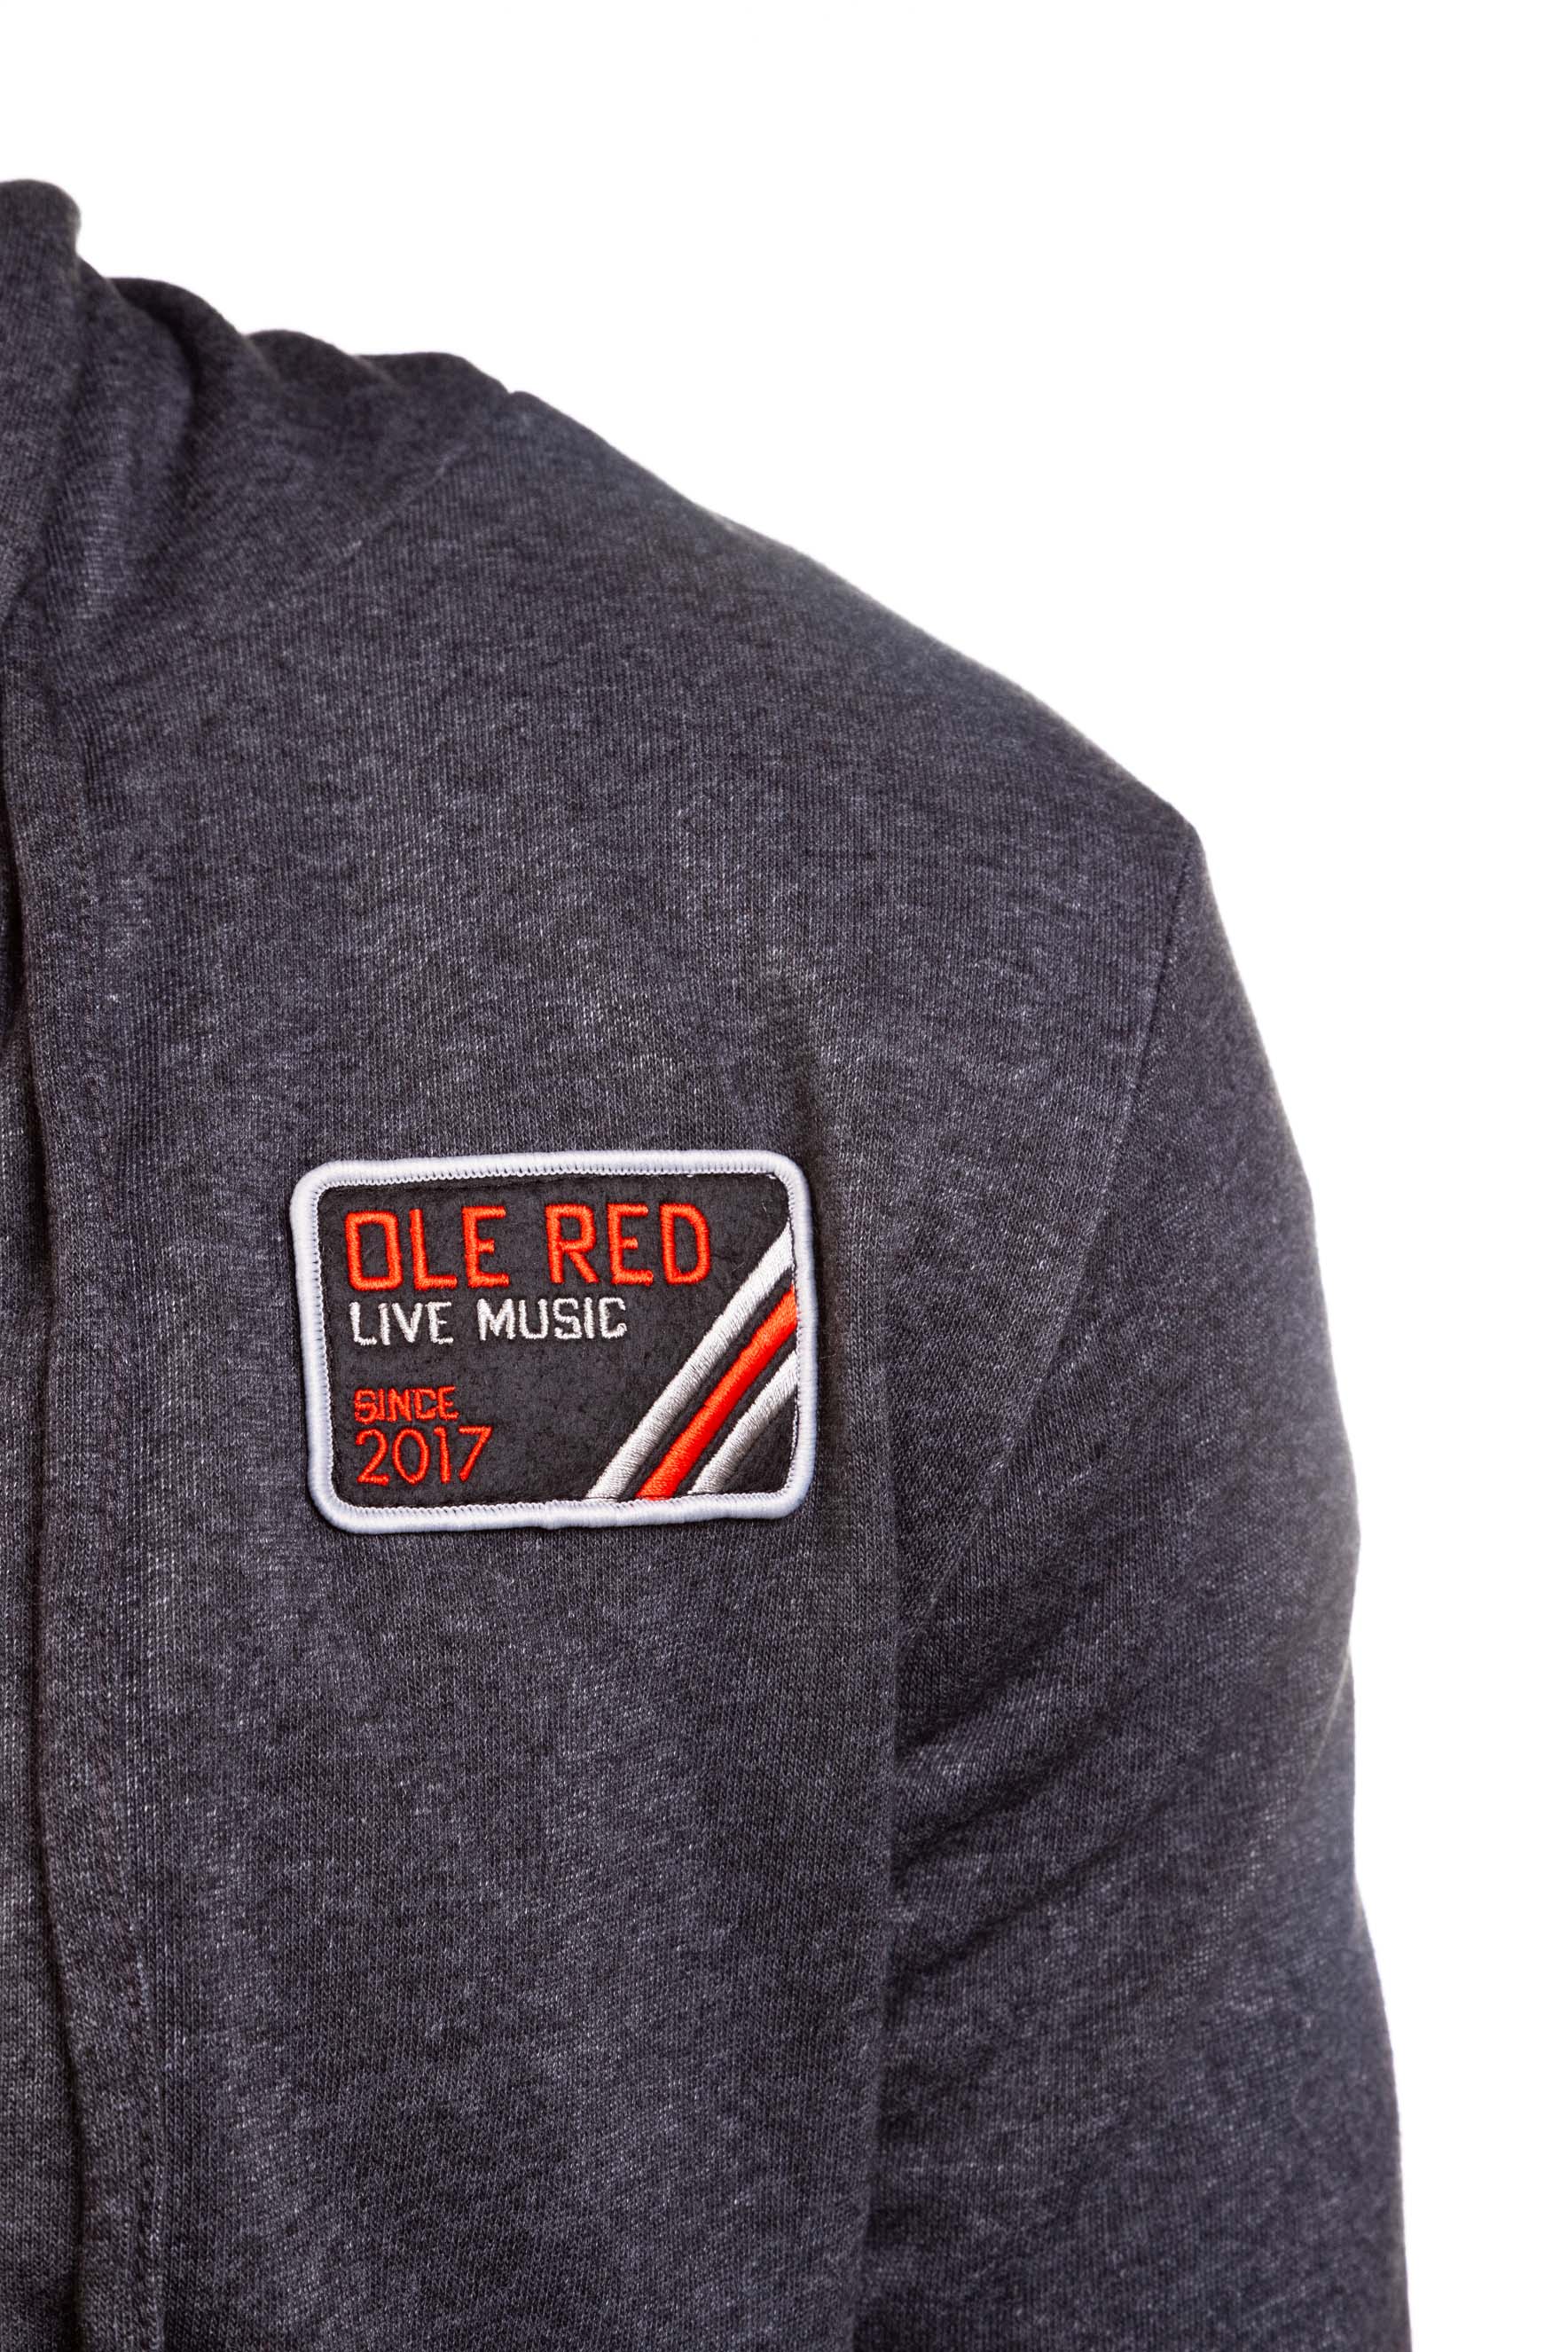 Ole Red Patch Zip Hoodie